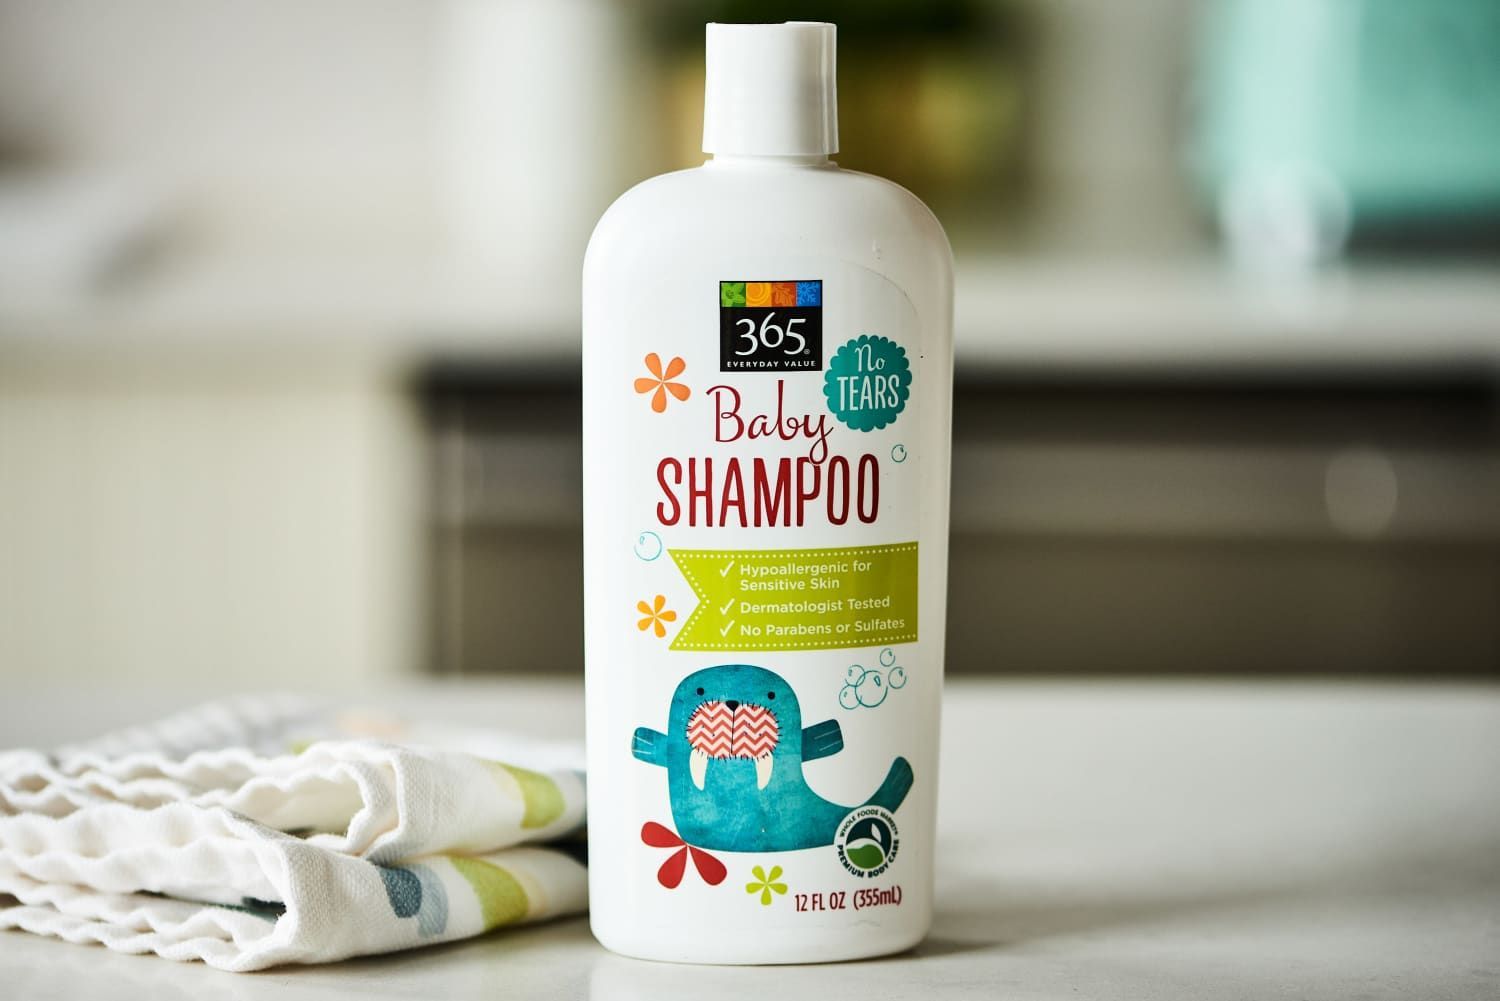 If You Ever Do Laundry or Wear Makeup, You Need Some Baby Shampoo -   13 makeup Easy baby shampoo ideas